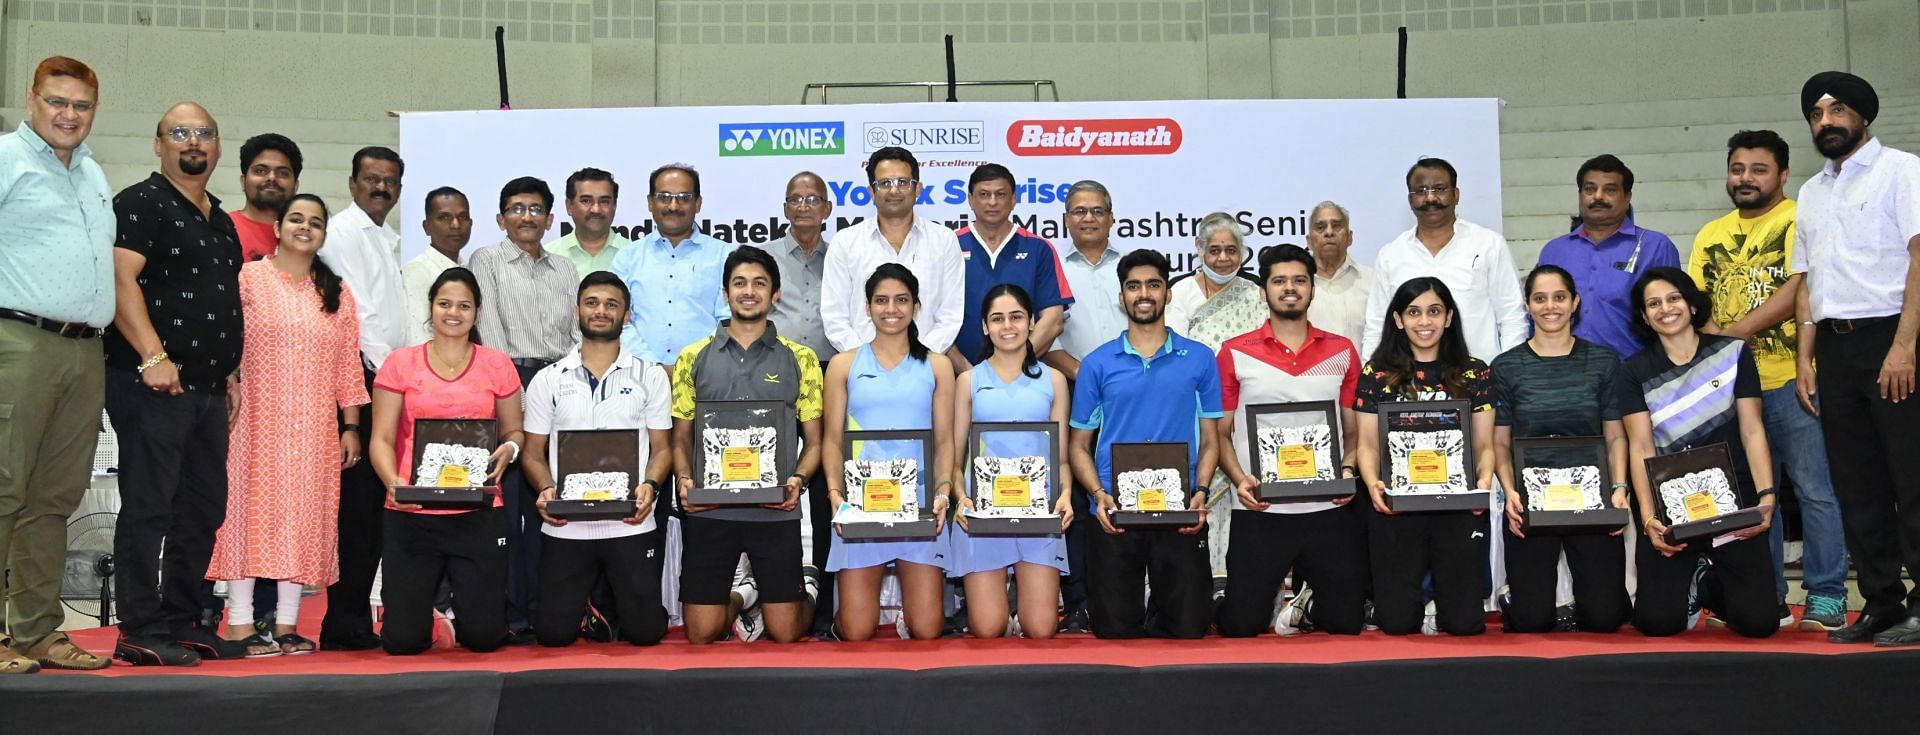 All the winners and runners-up of Maharashtra Senior State Badminton Championship display their trophies in Nagpur. (Picture: NDBA)